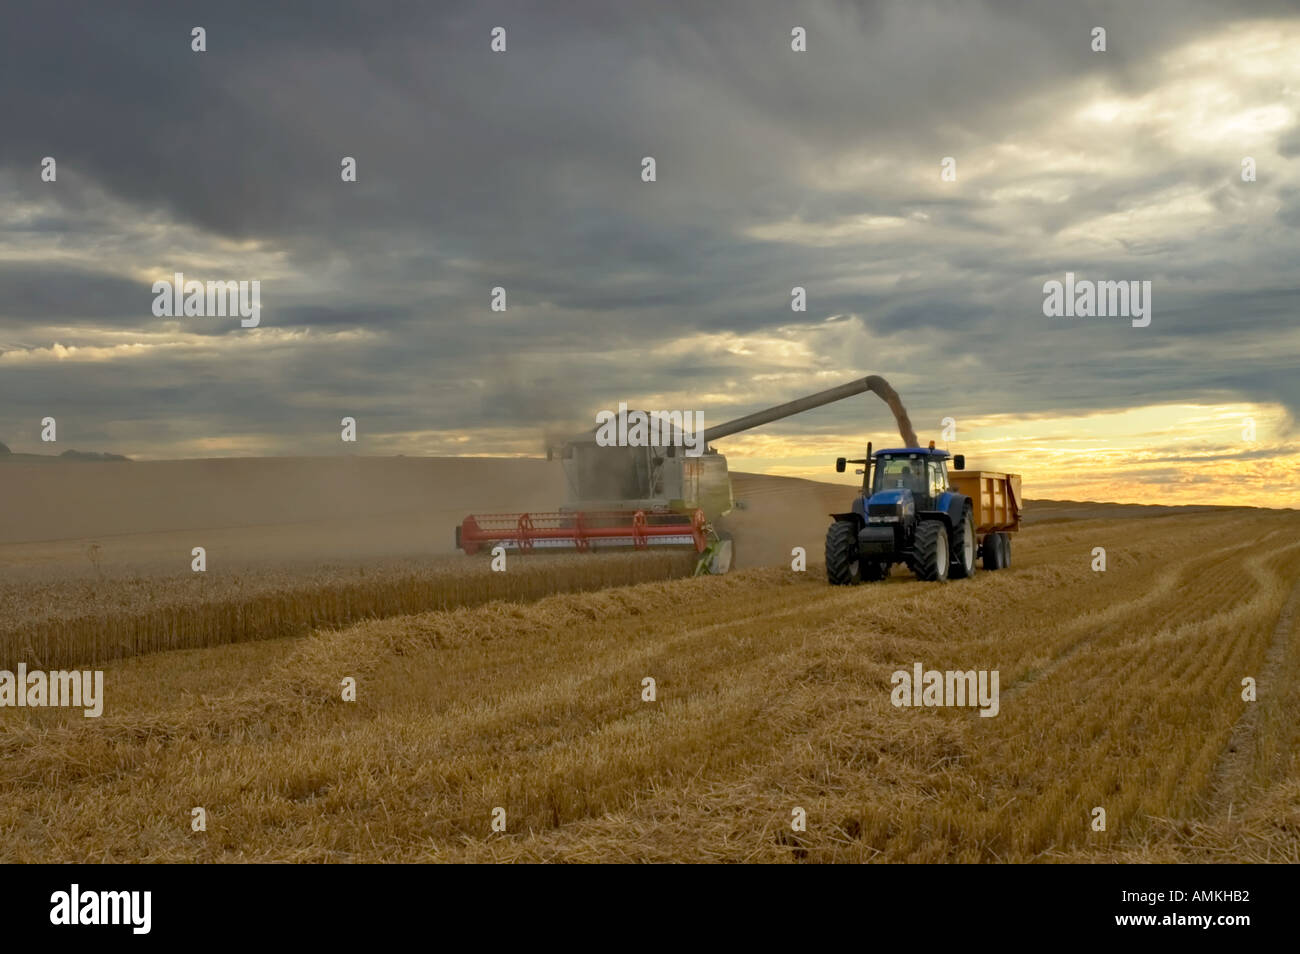 Combine harvester delivering grain at dusk while a storm brews Stock Photo